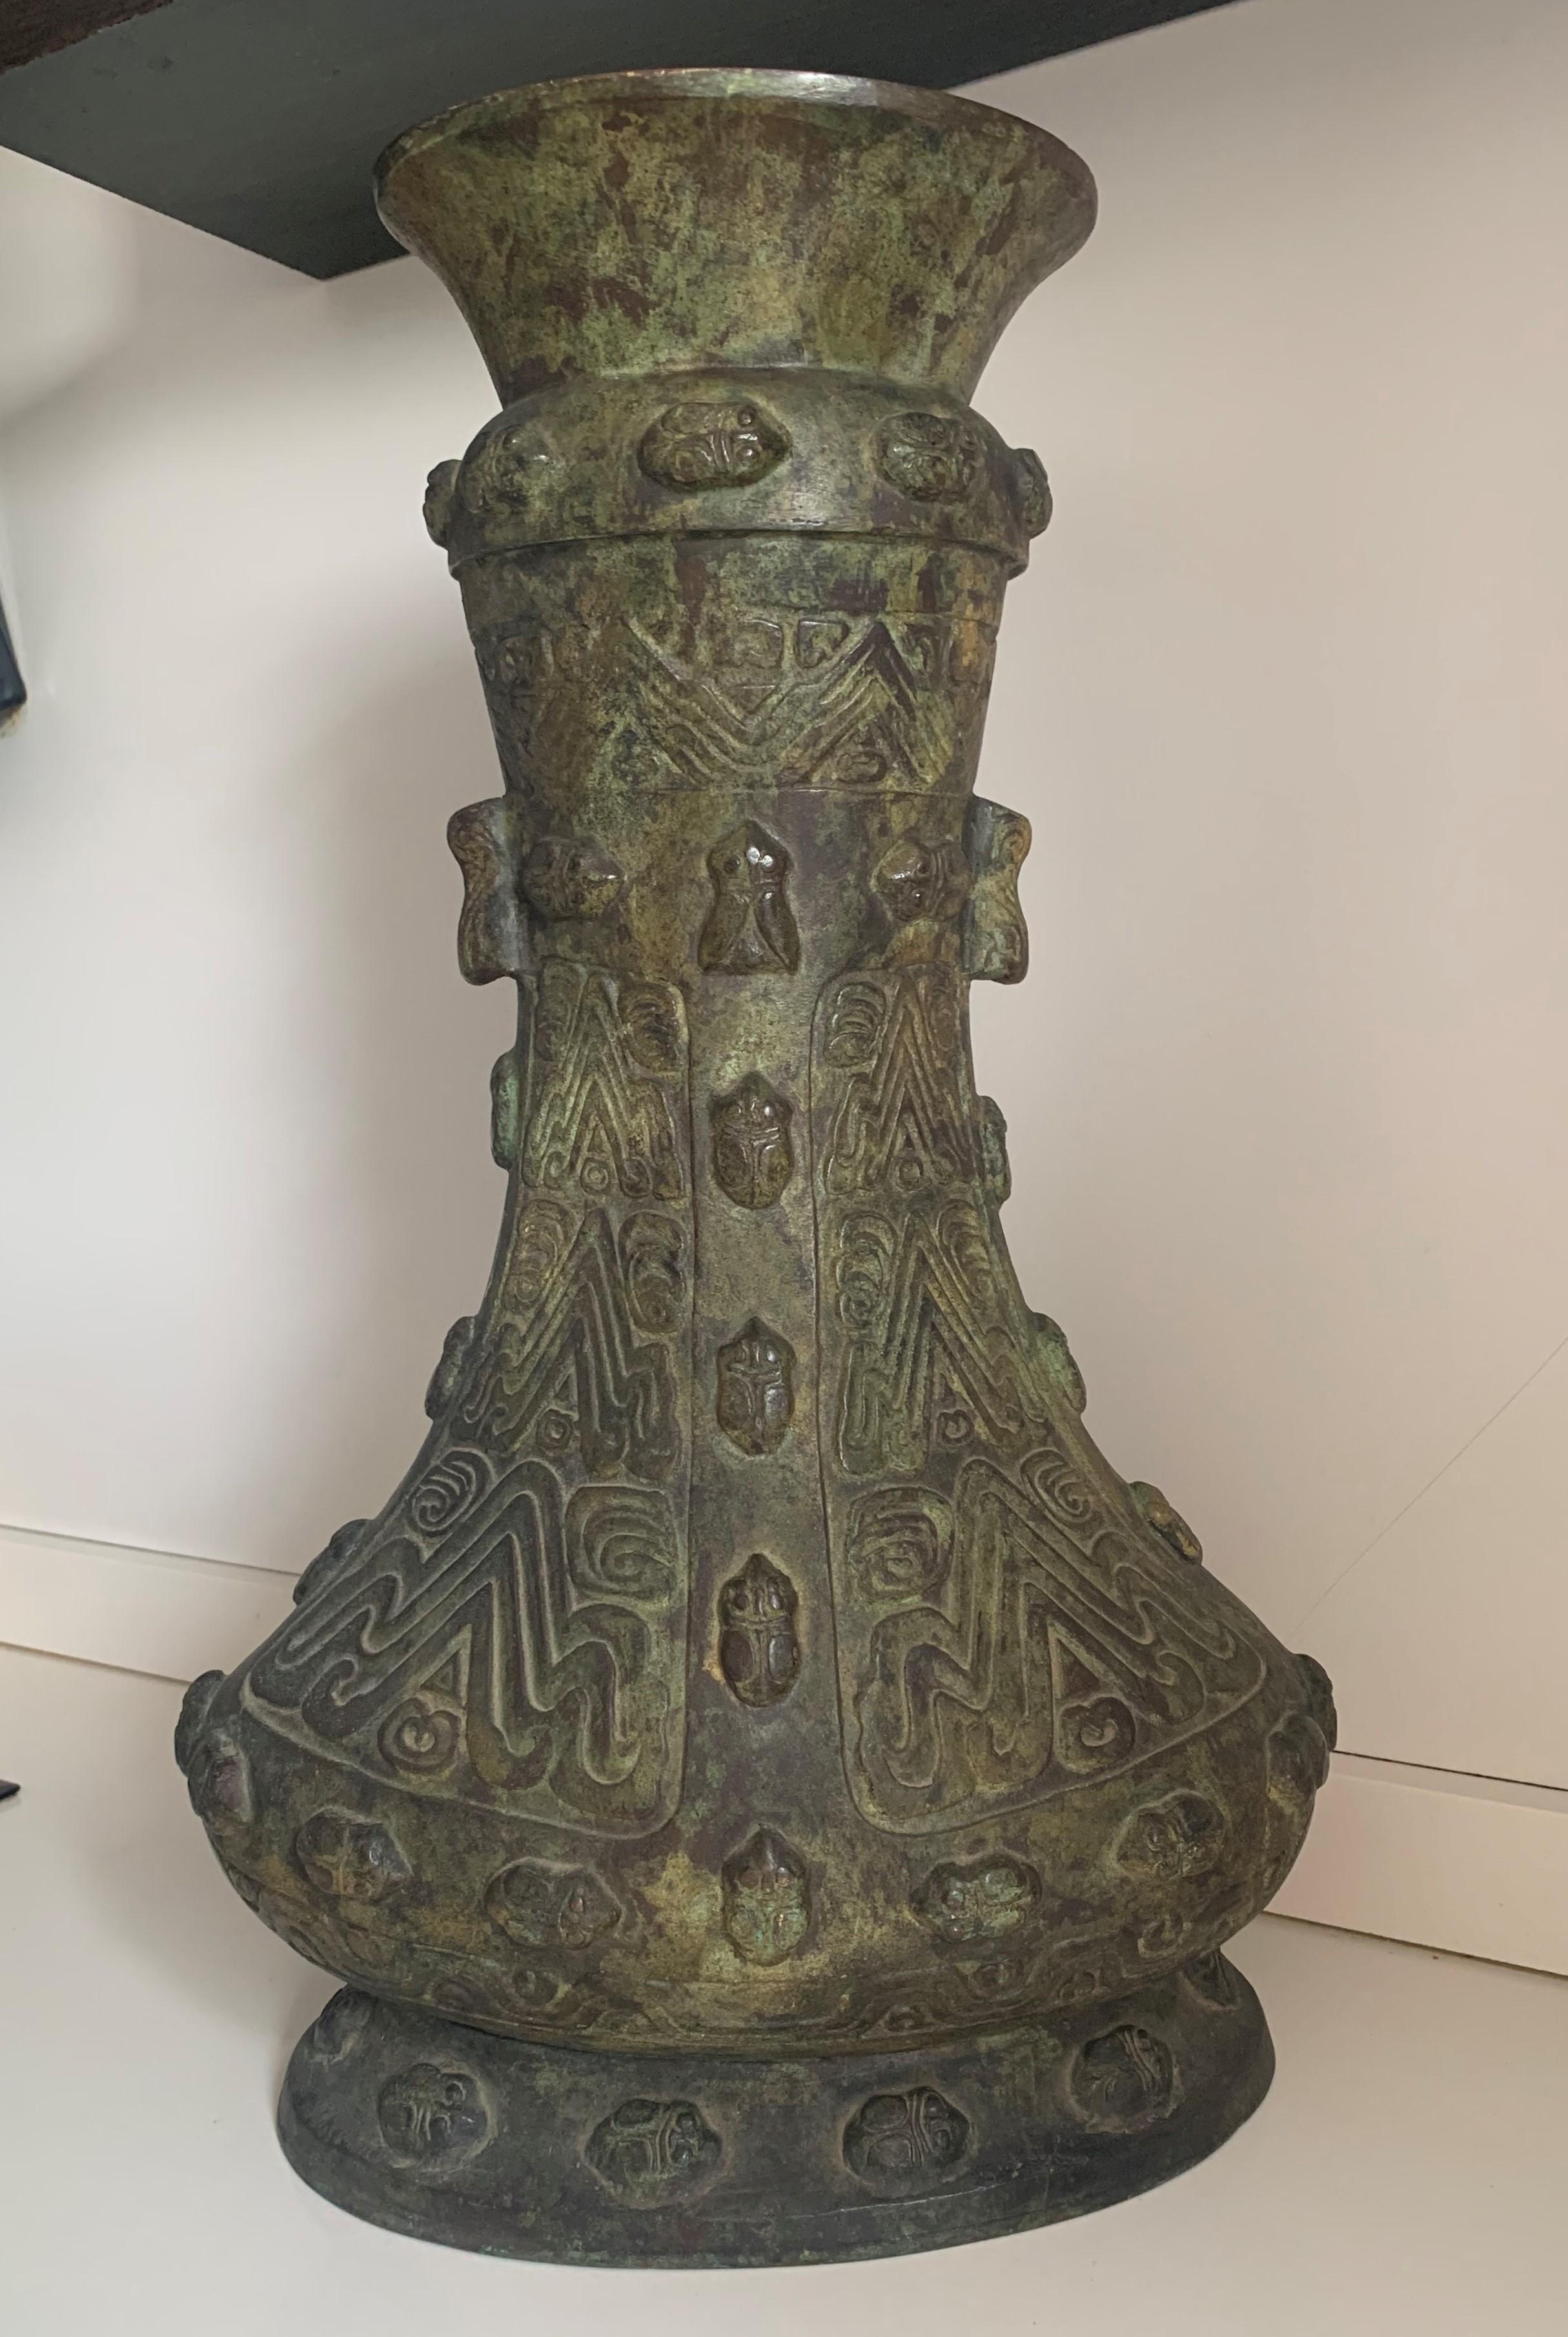 Of Classic vessel form, with an oval, splayed foot, narrow, waisted body and wide, flaring mouth.
Very heavy and archaist vessel with lucky beetles around the sides.
   